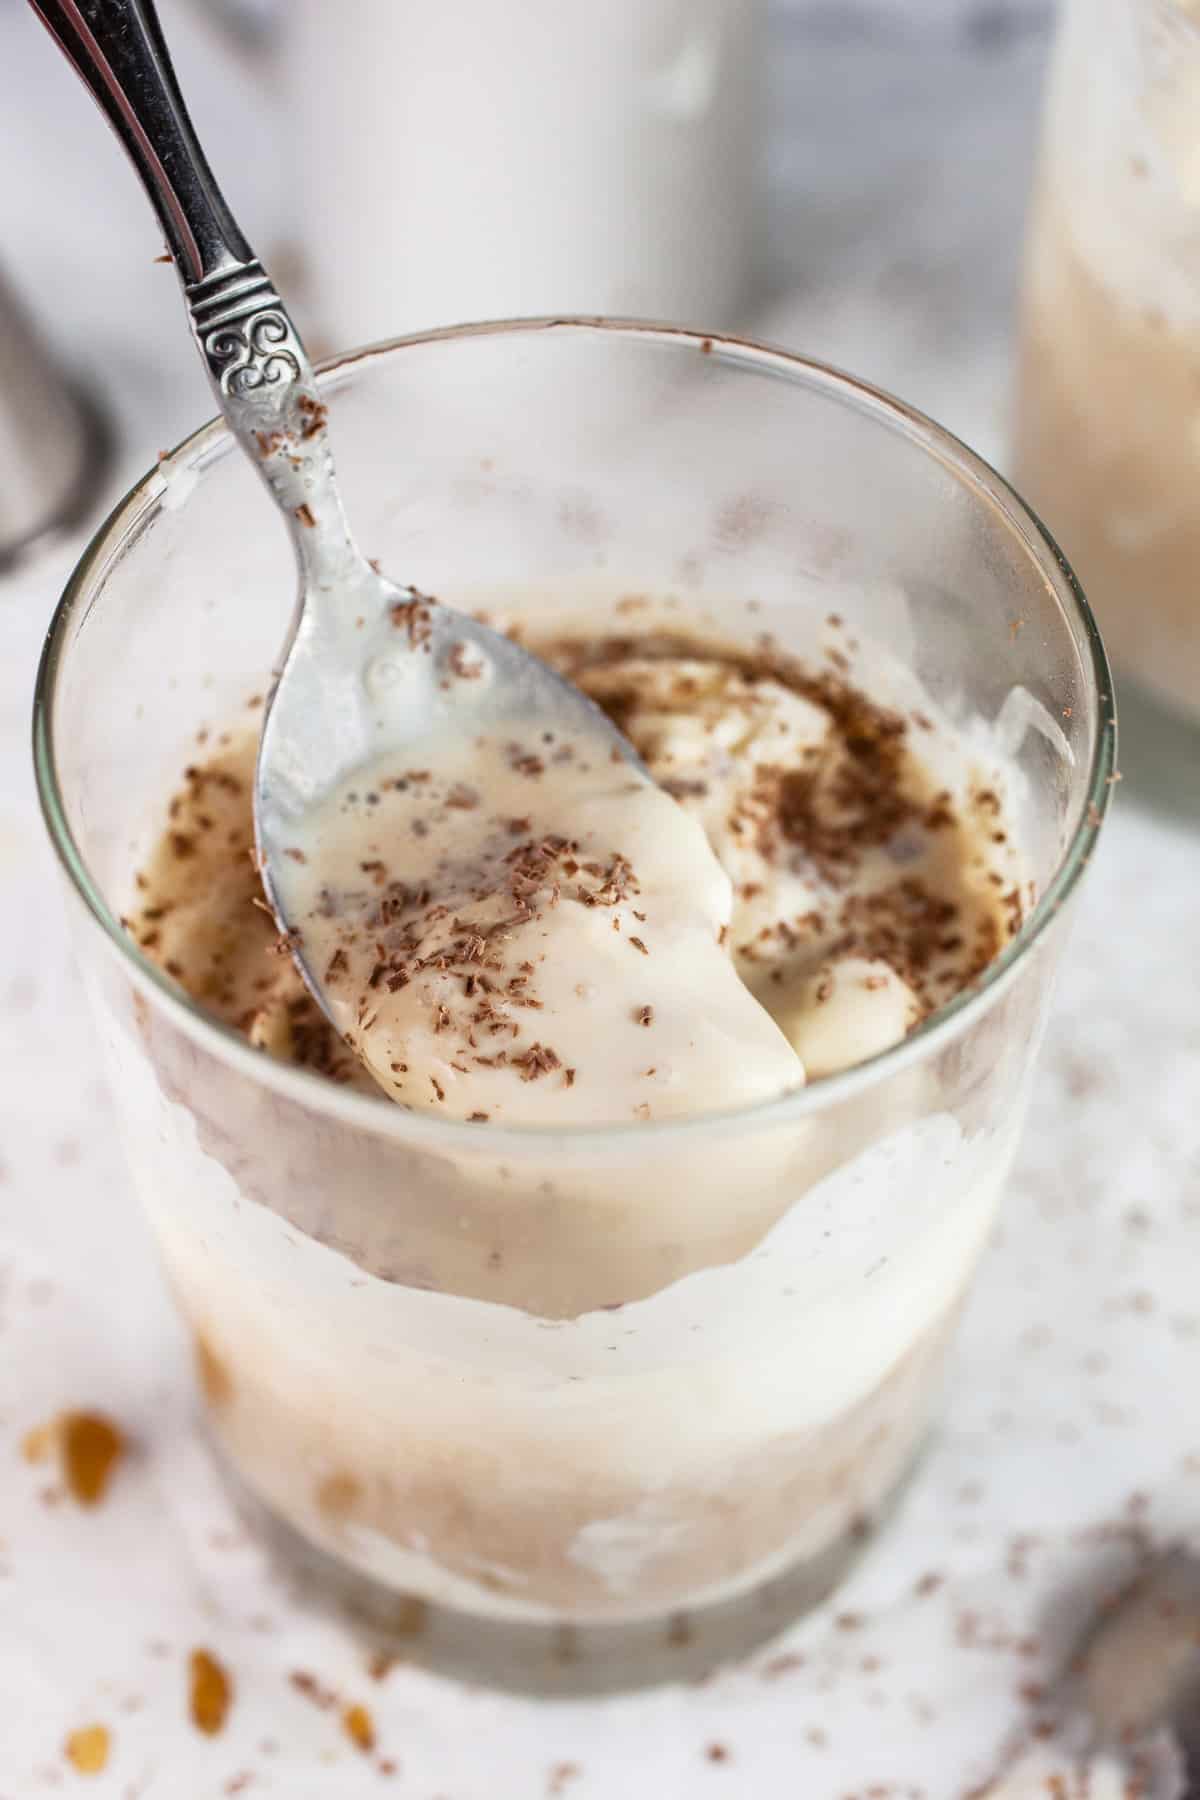 Spoonful of affogato ice cream cocktail in glass.